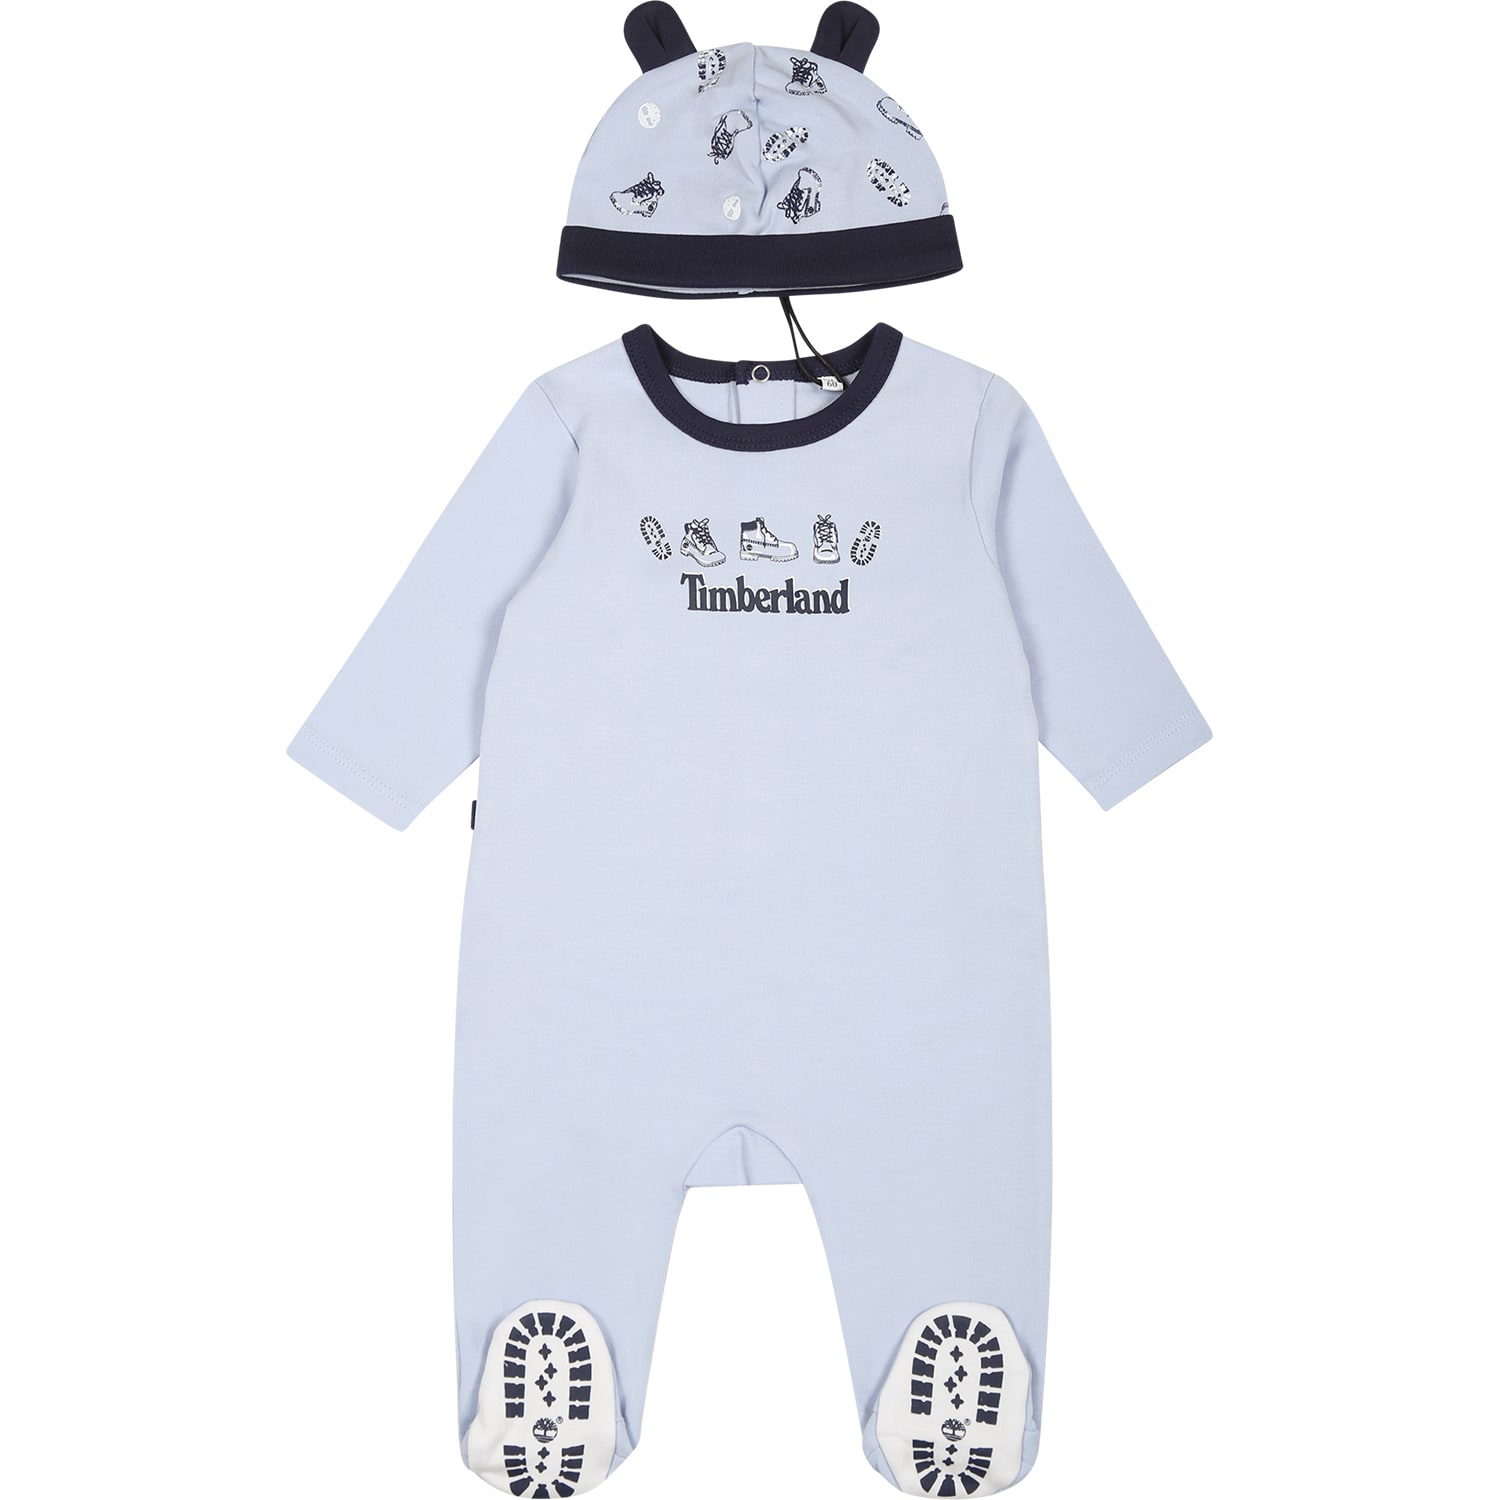 Timberland Light Blue Set For Baby Boy With Logo